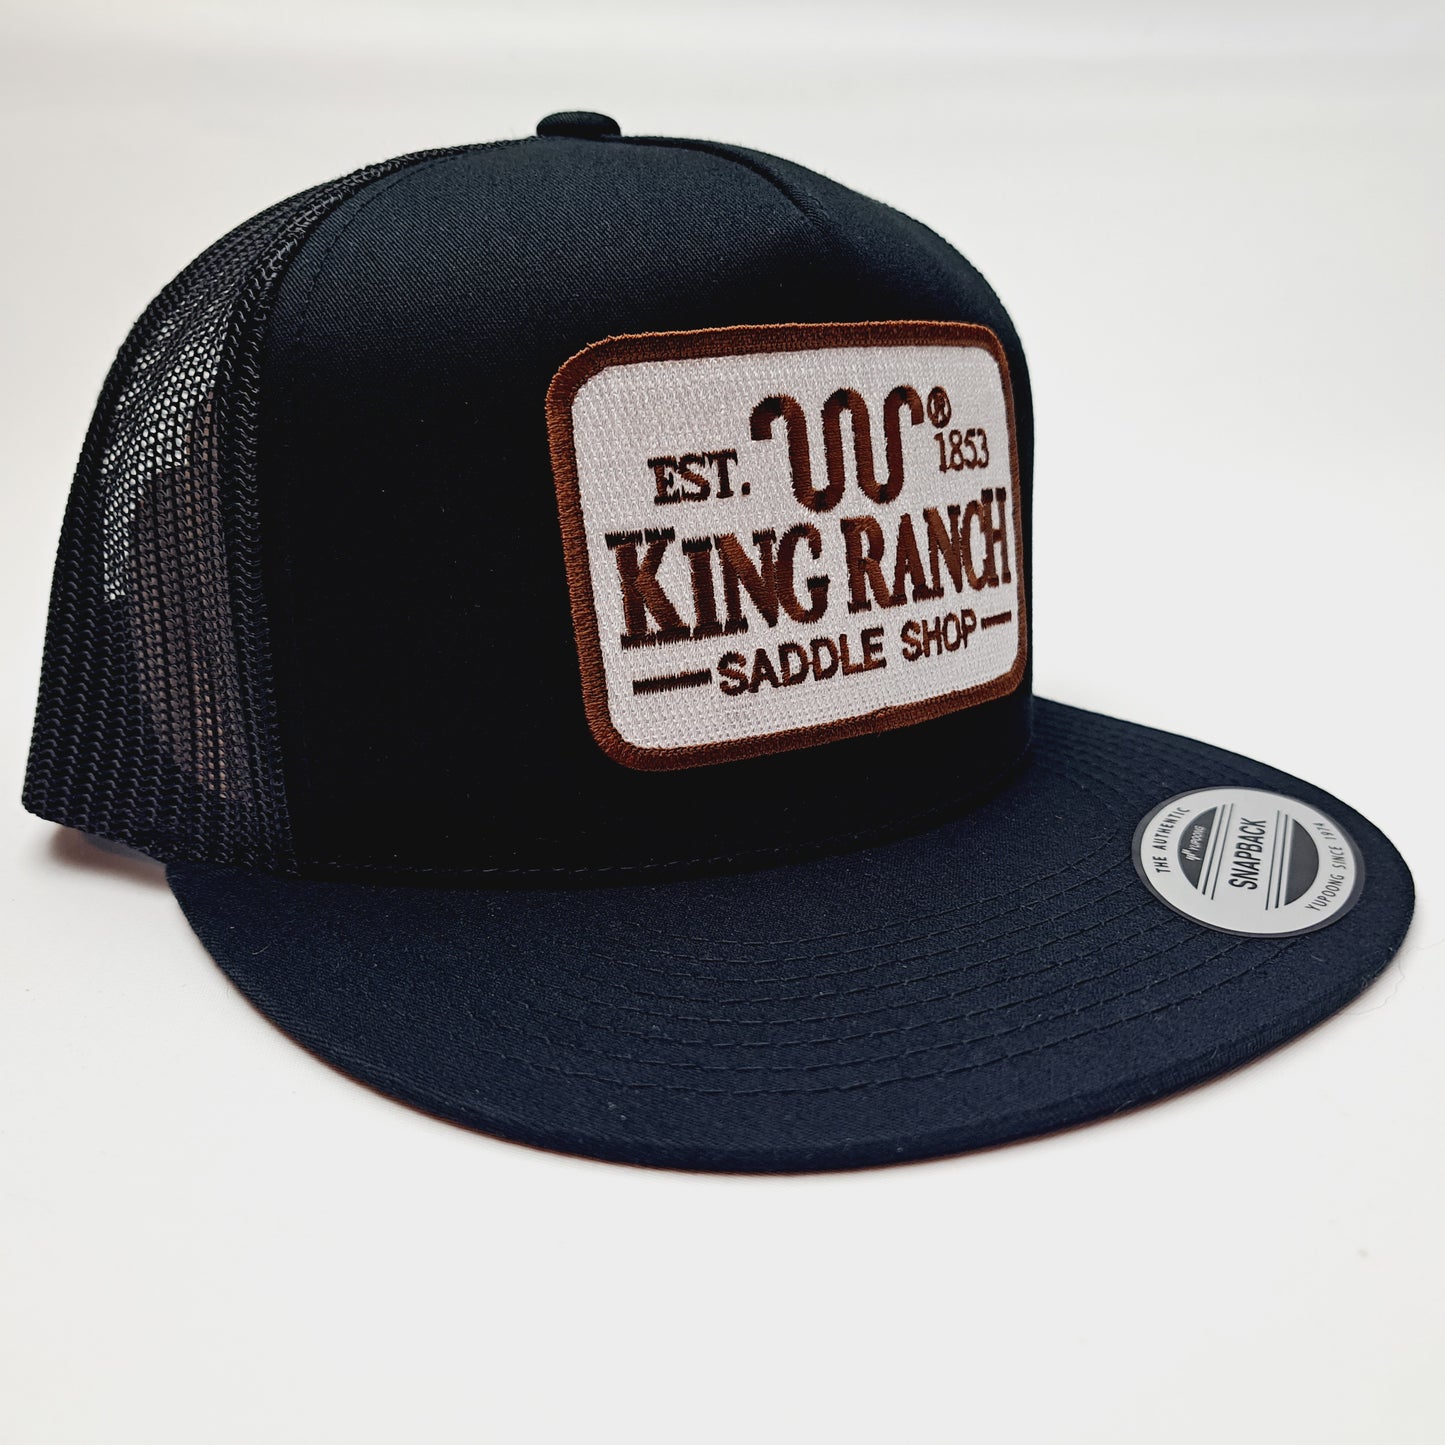 King Ranch Flat Bill Mesh Trucker Snapback Hat Cap Black Embroidered Patch